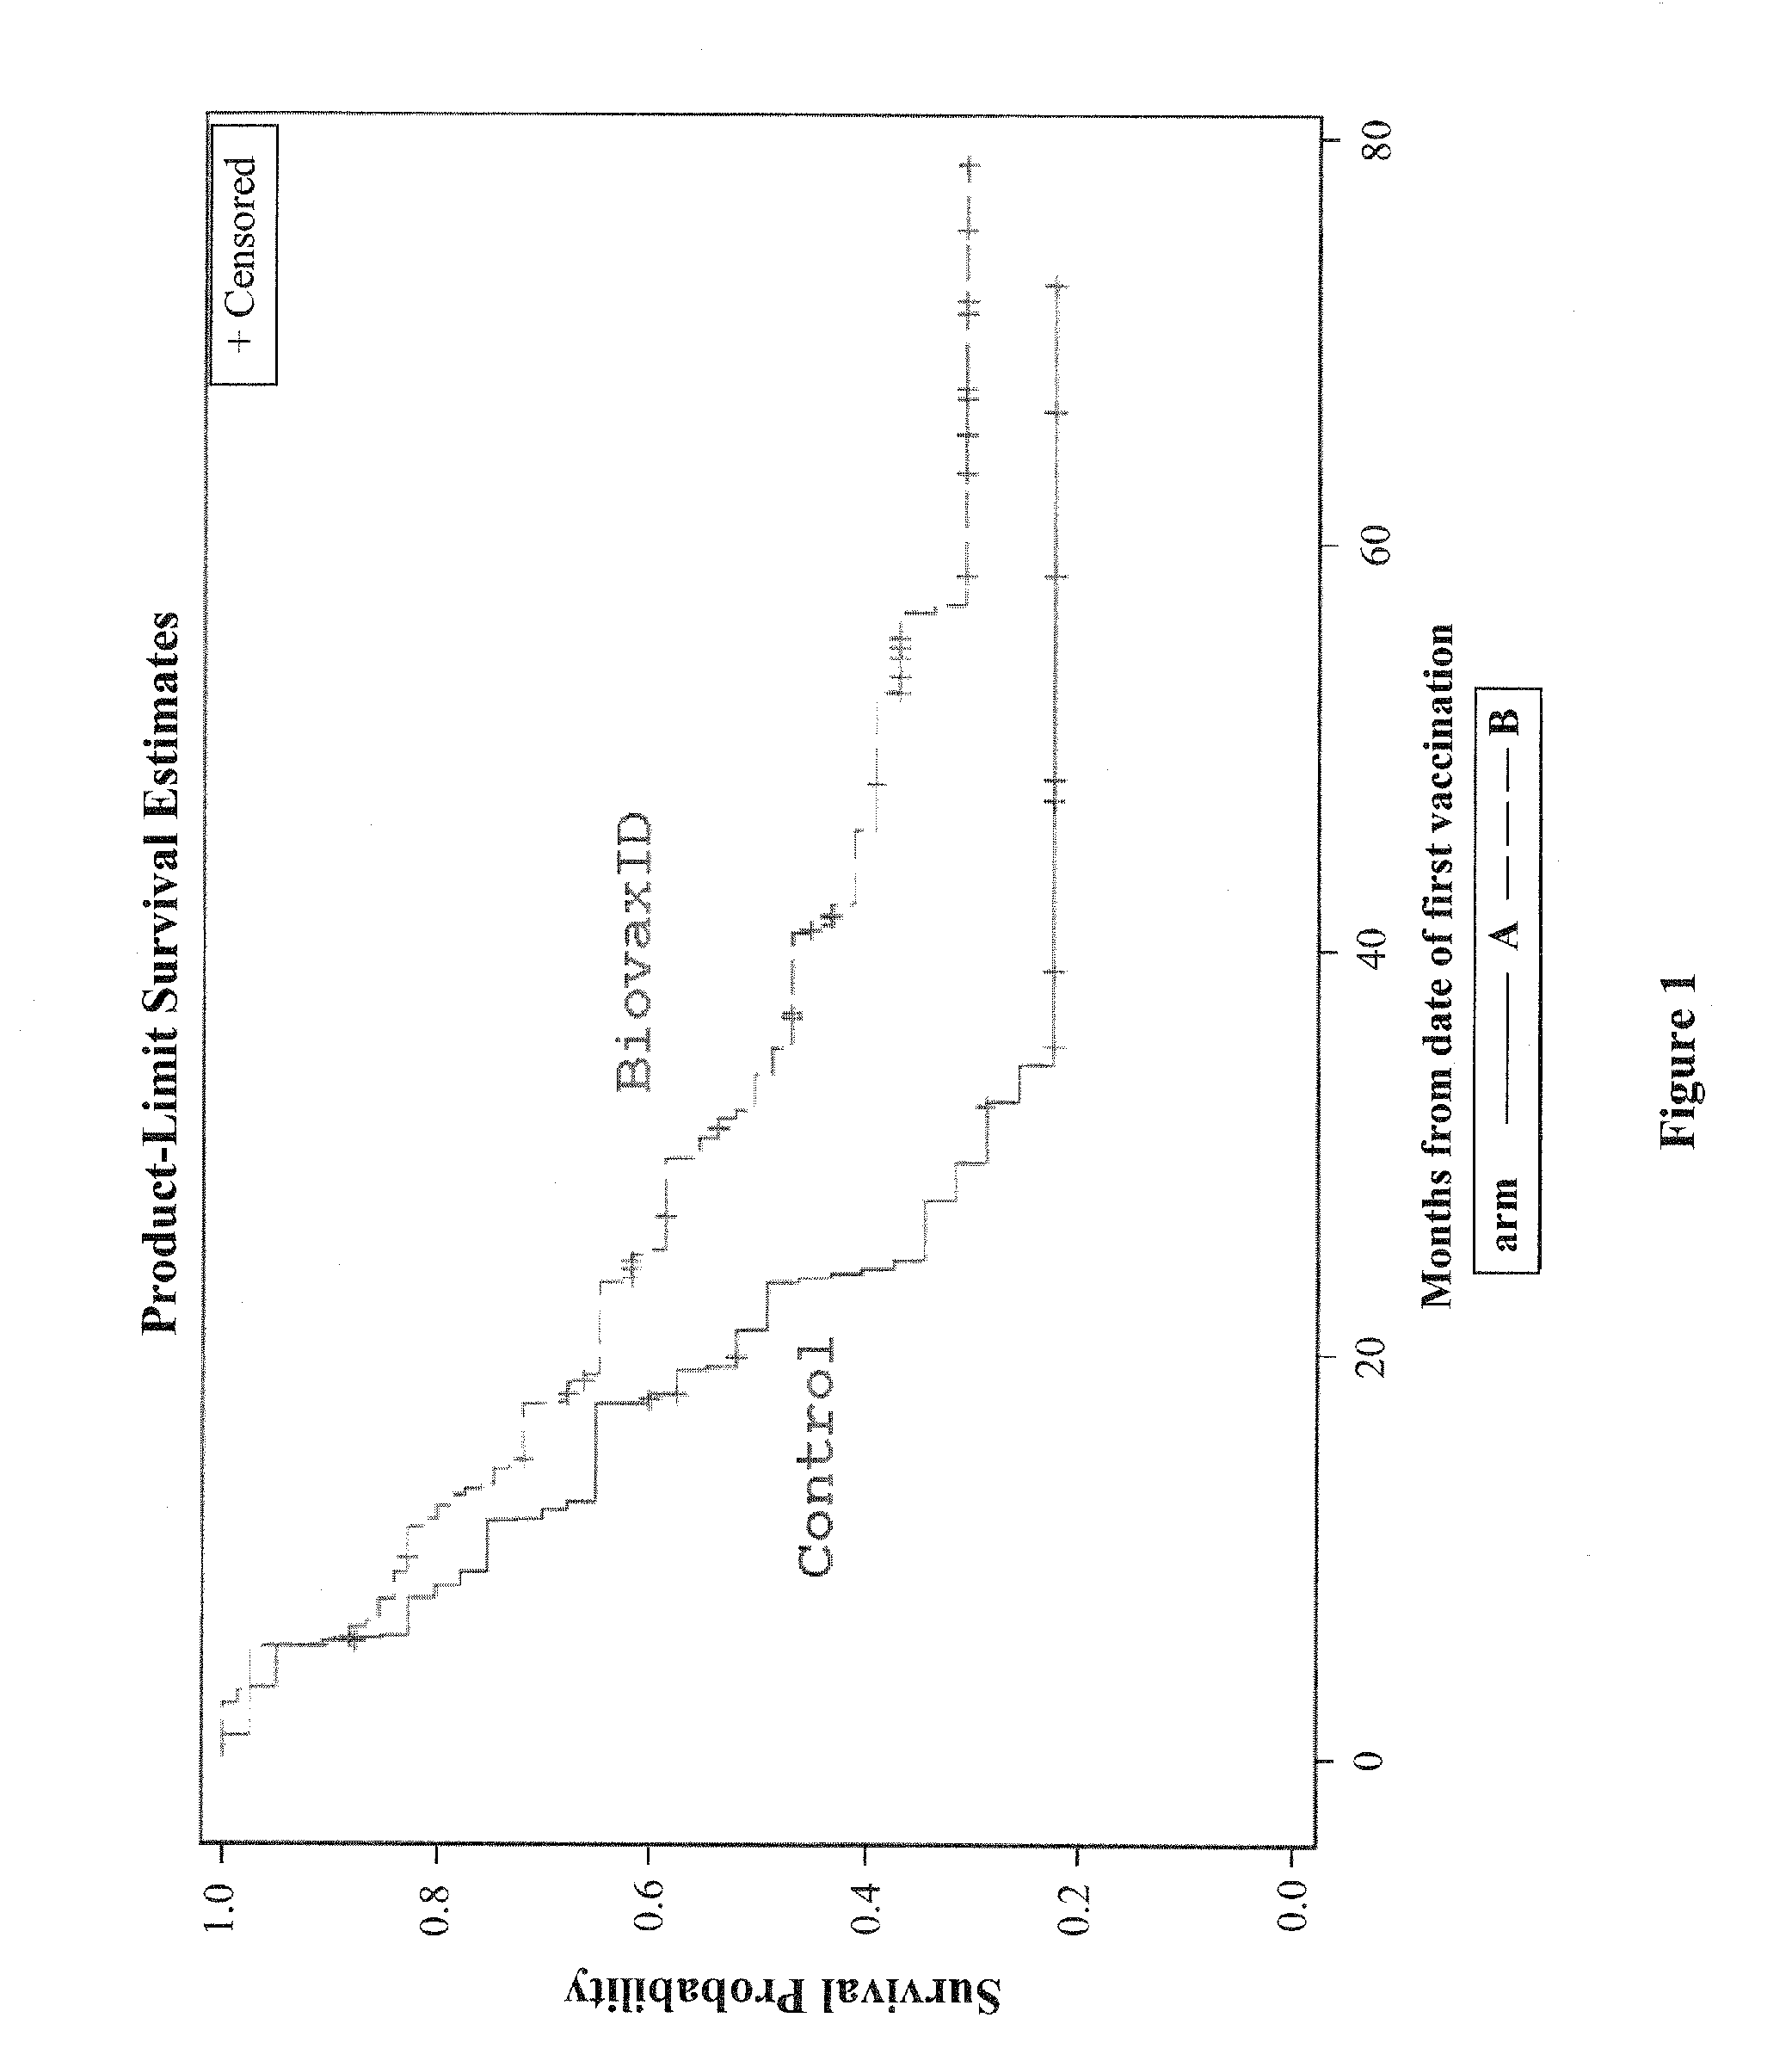 Methods for inducing a sustained immune response against a b-cell idiotype using autologous Anti-idiotypic vaccines